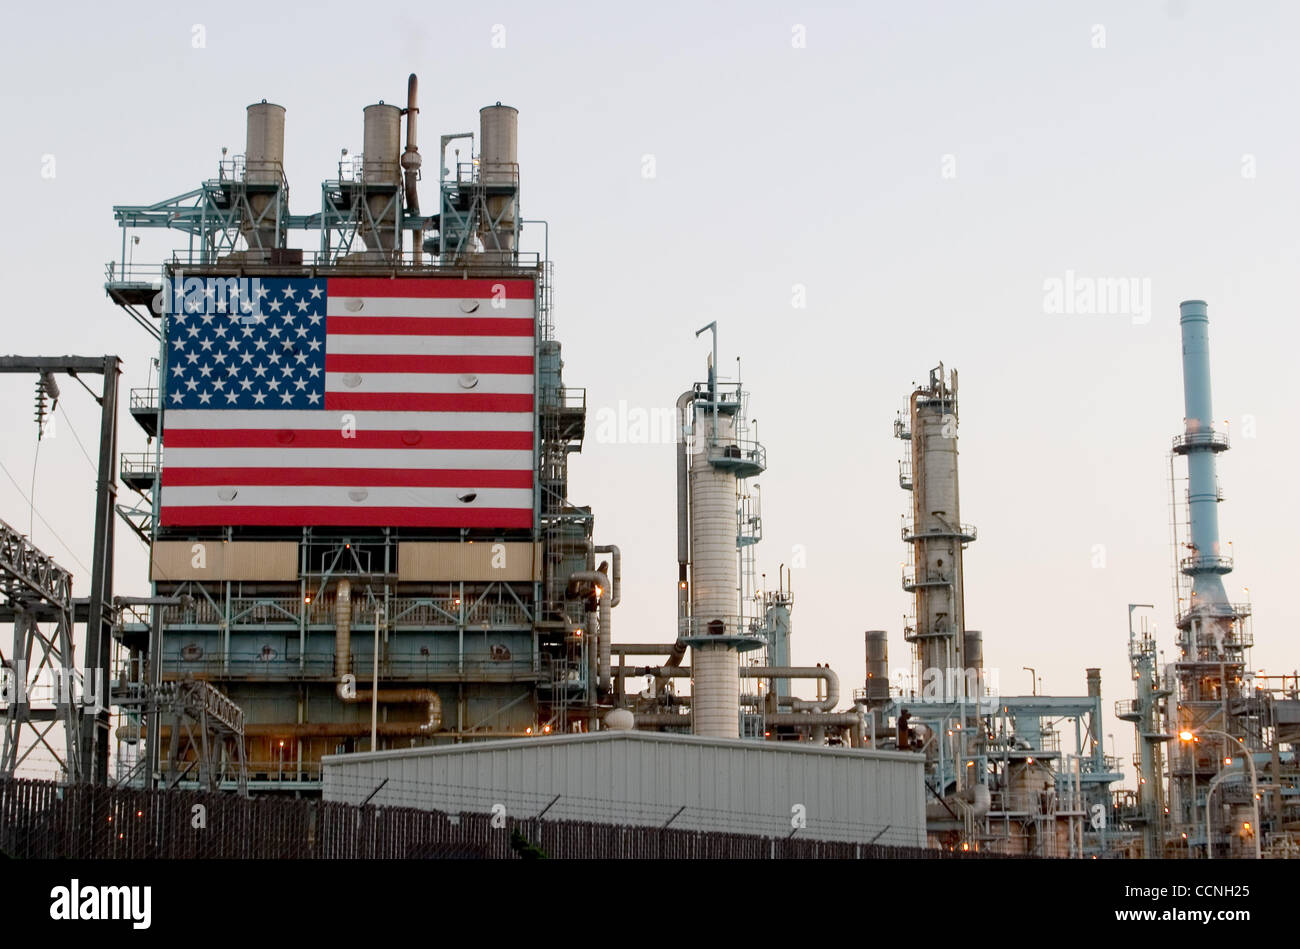 Oct 18, 2004; Long Beach, CA, USA; The Conoco philips Oil Refinery at Carson nr Long Beach California with large stars and stripes USA flag hanging next to the huge chimmney smokestacks. The refinery has security fence with barbed razor wire around it. Security has been increased at refinerys across Stock Photo